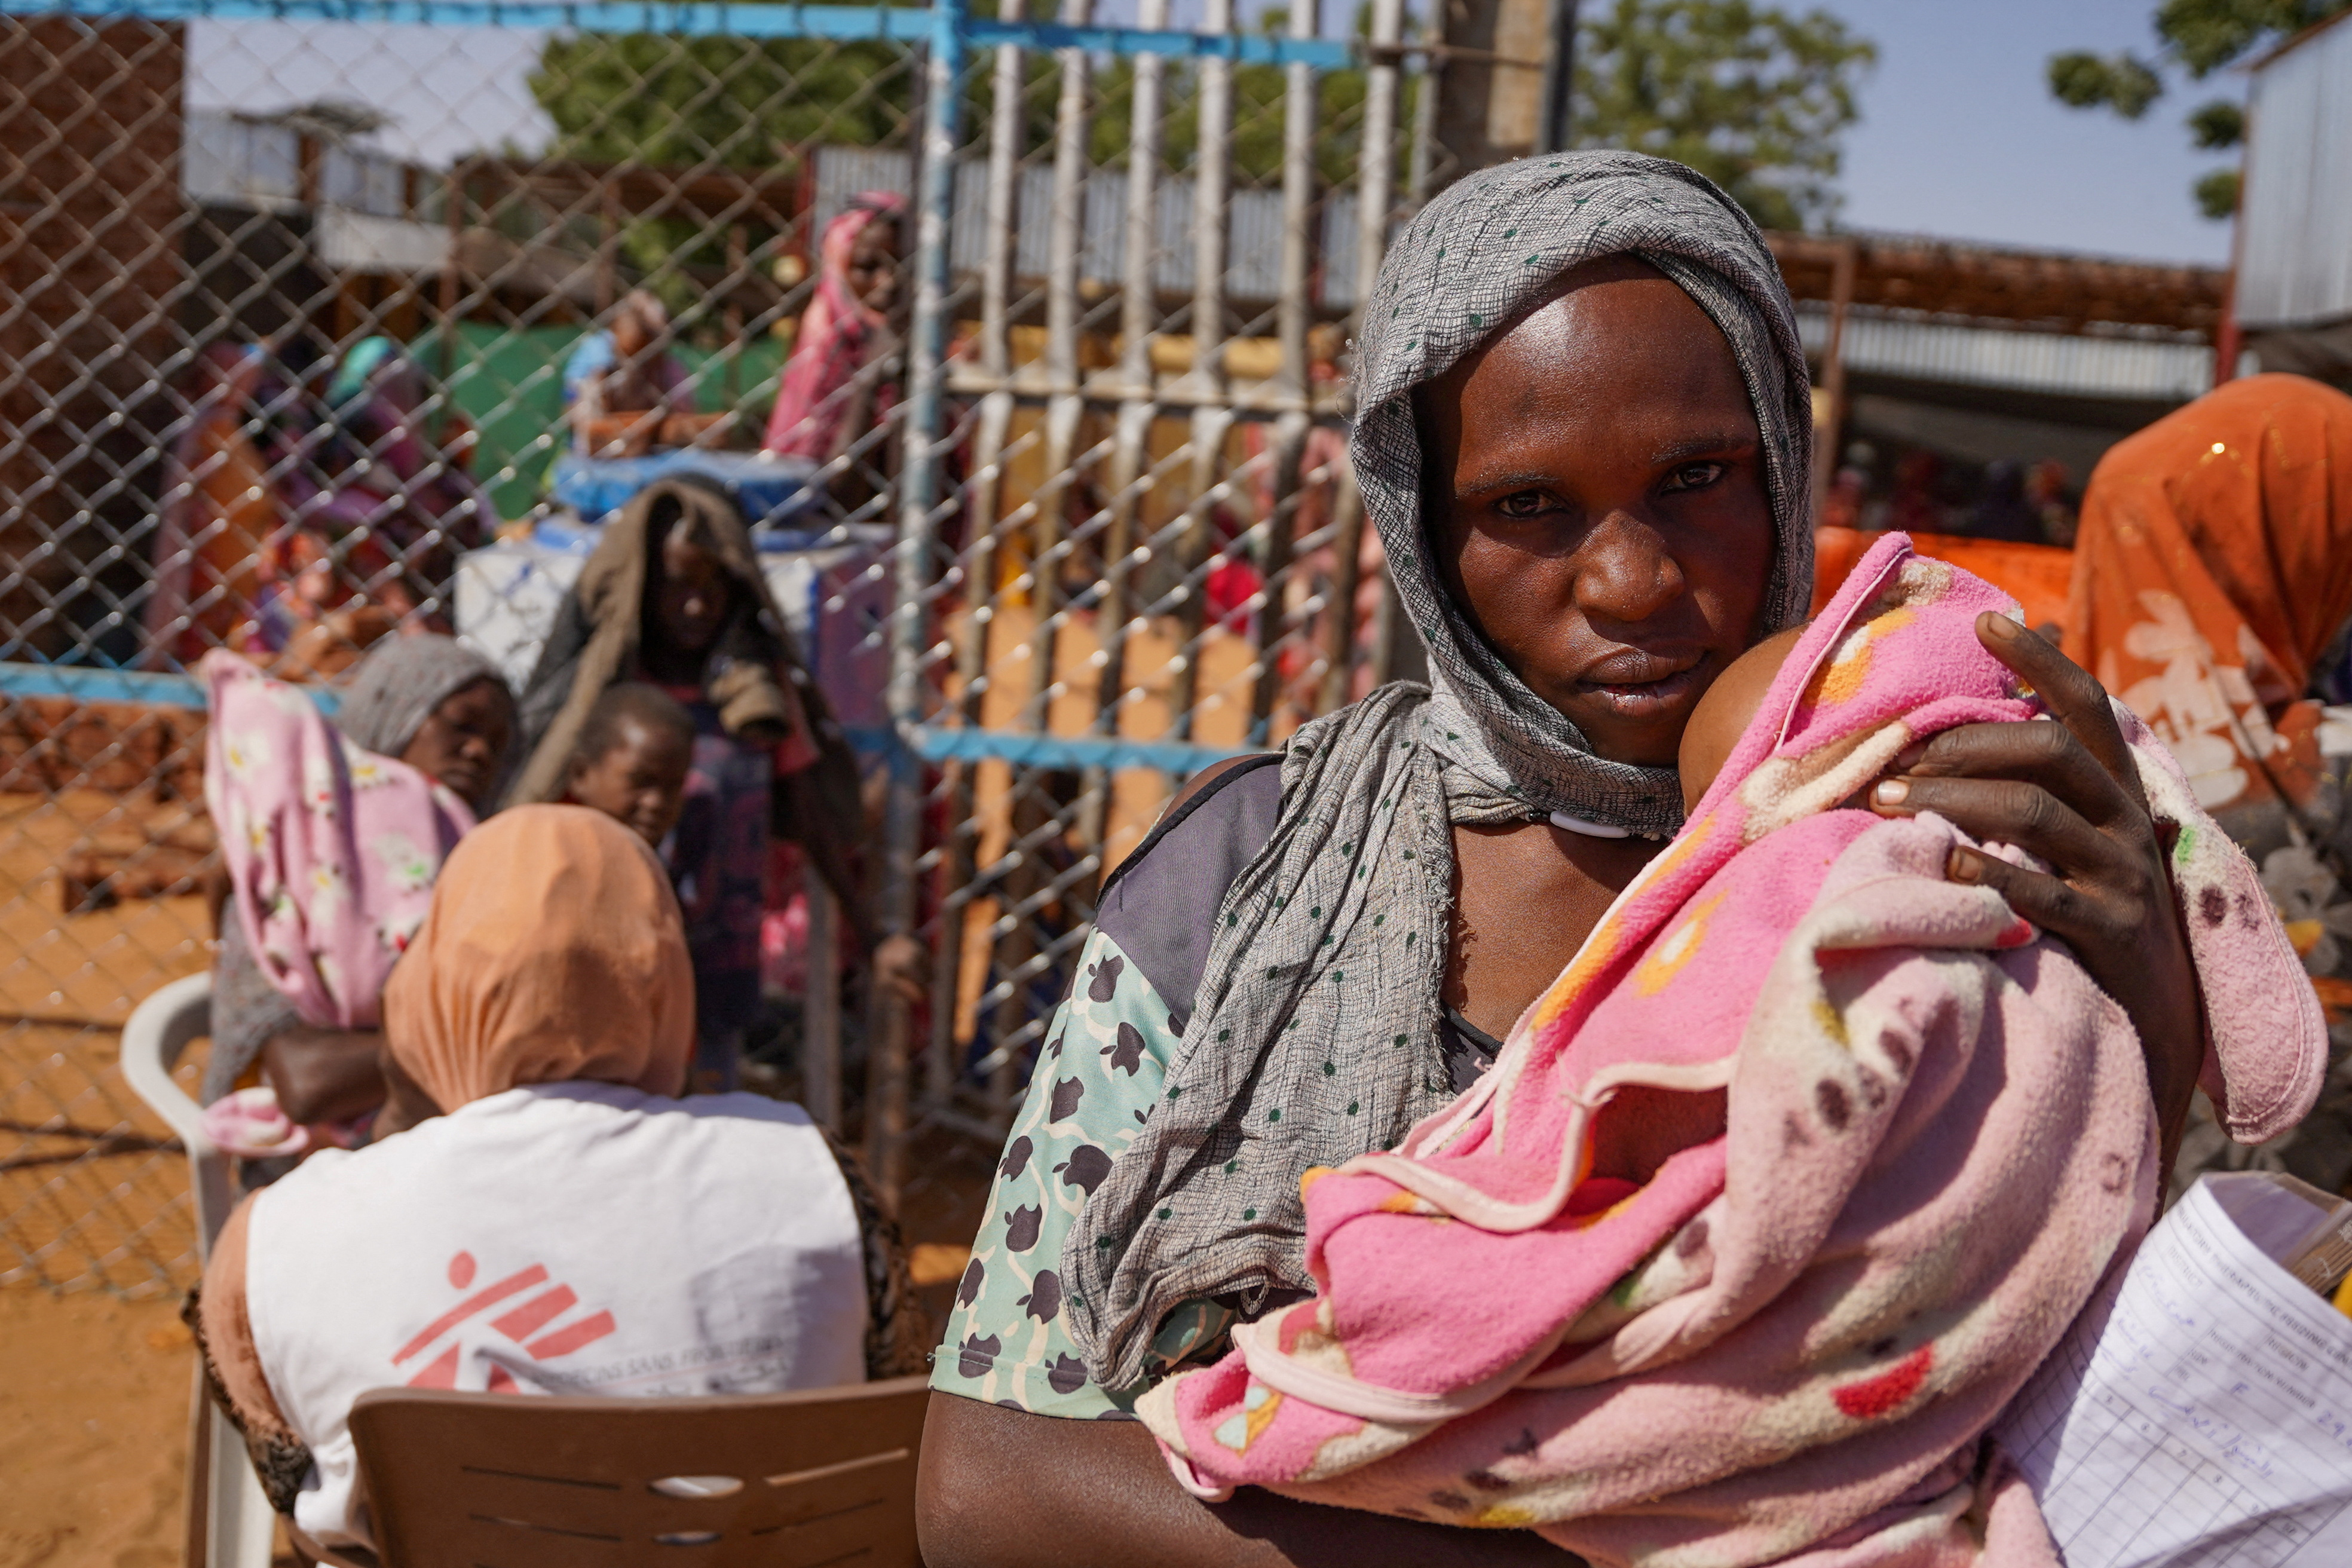 Handout photograph of a woman and baby at the Zamzam displacement camp in North Darfur